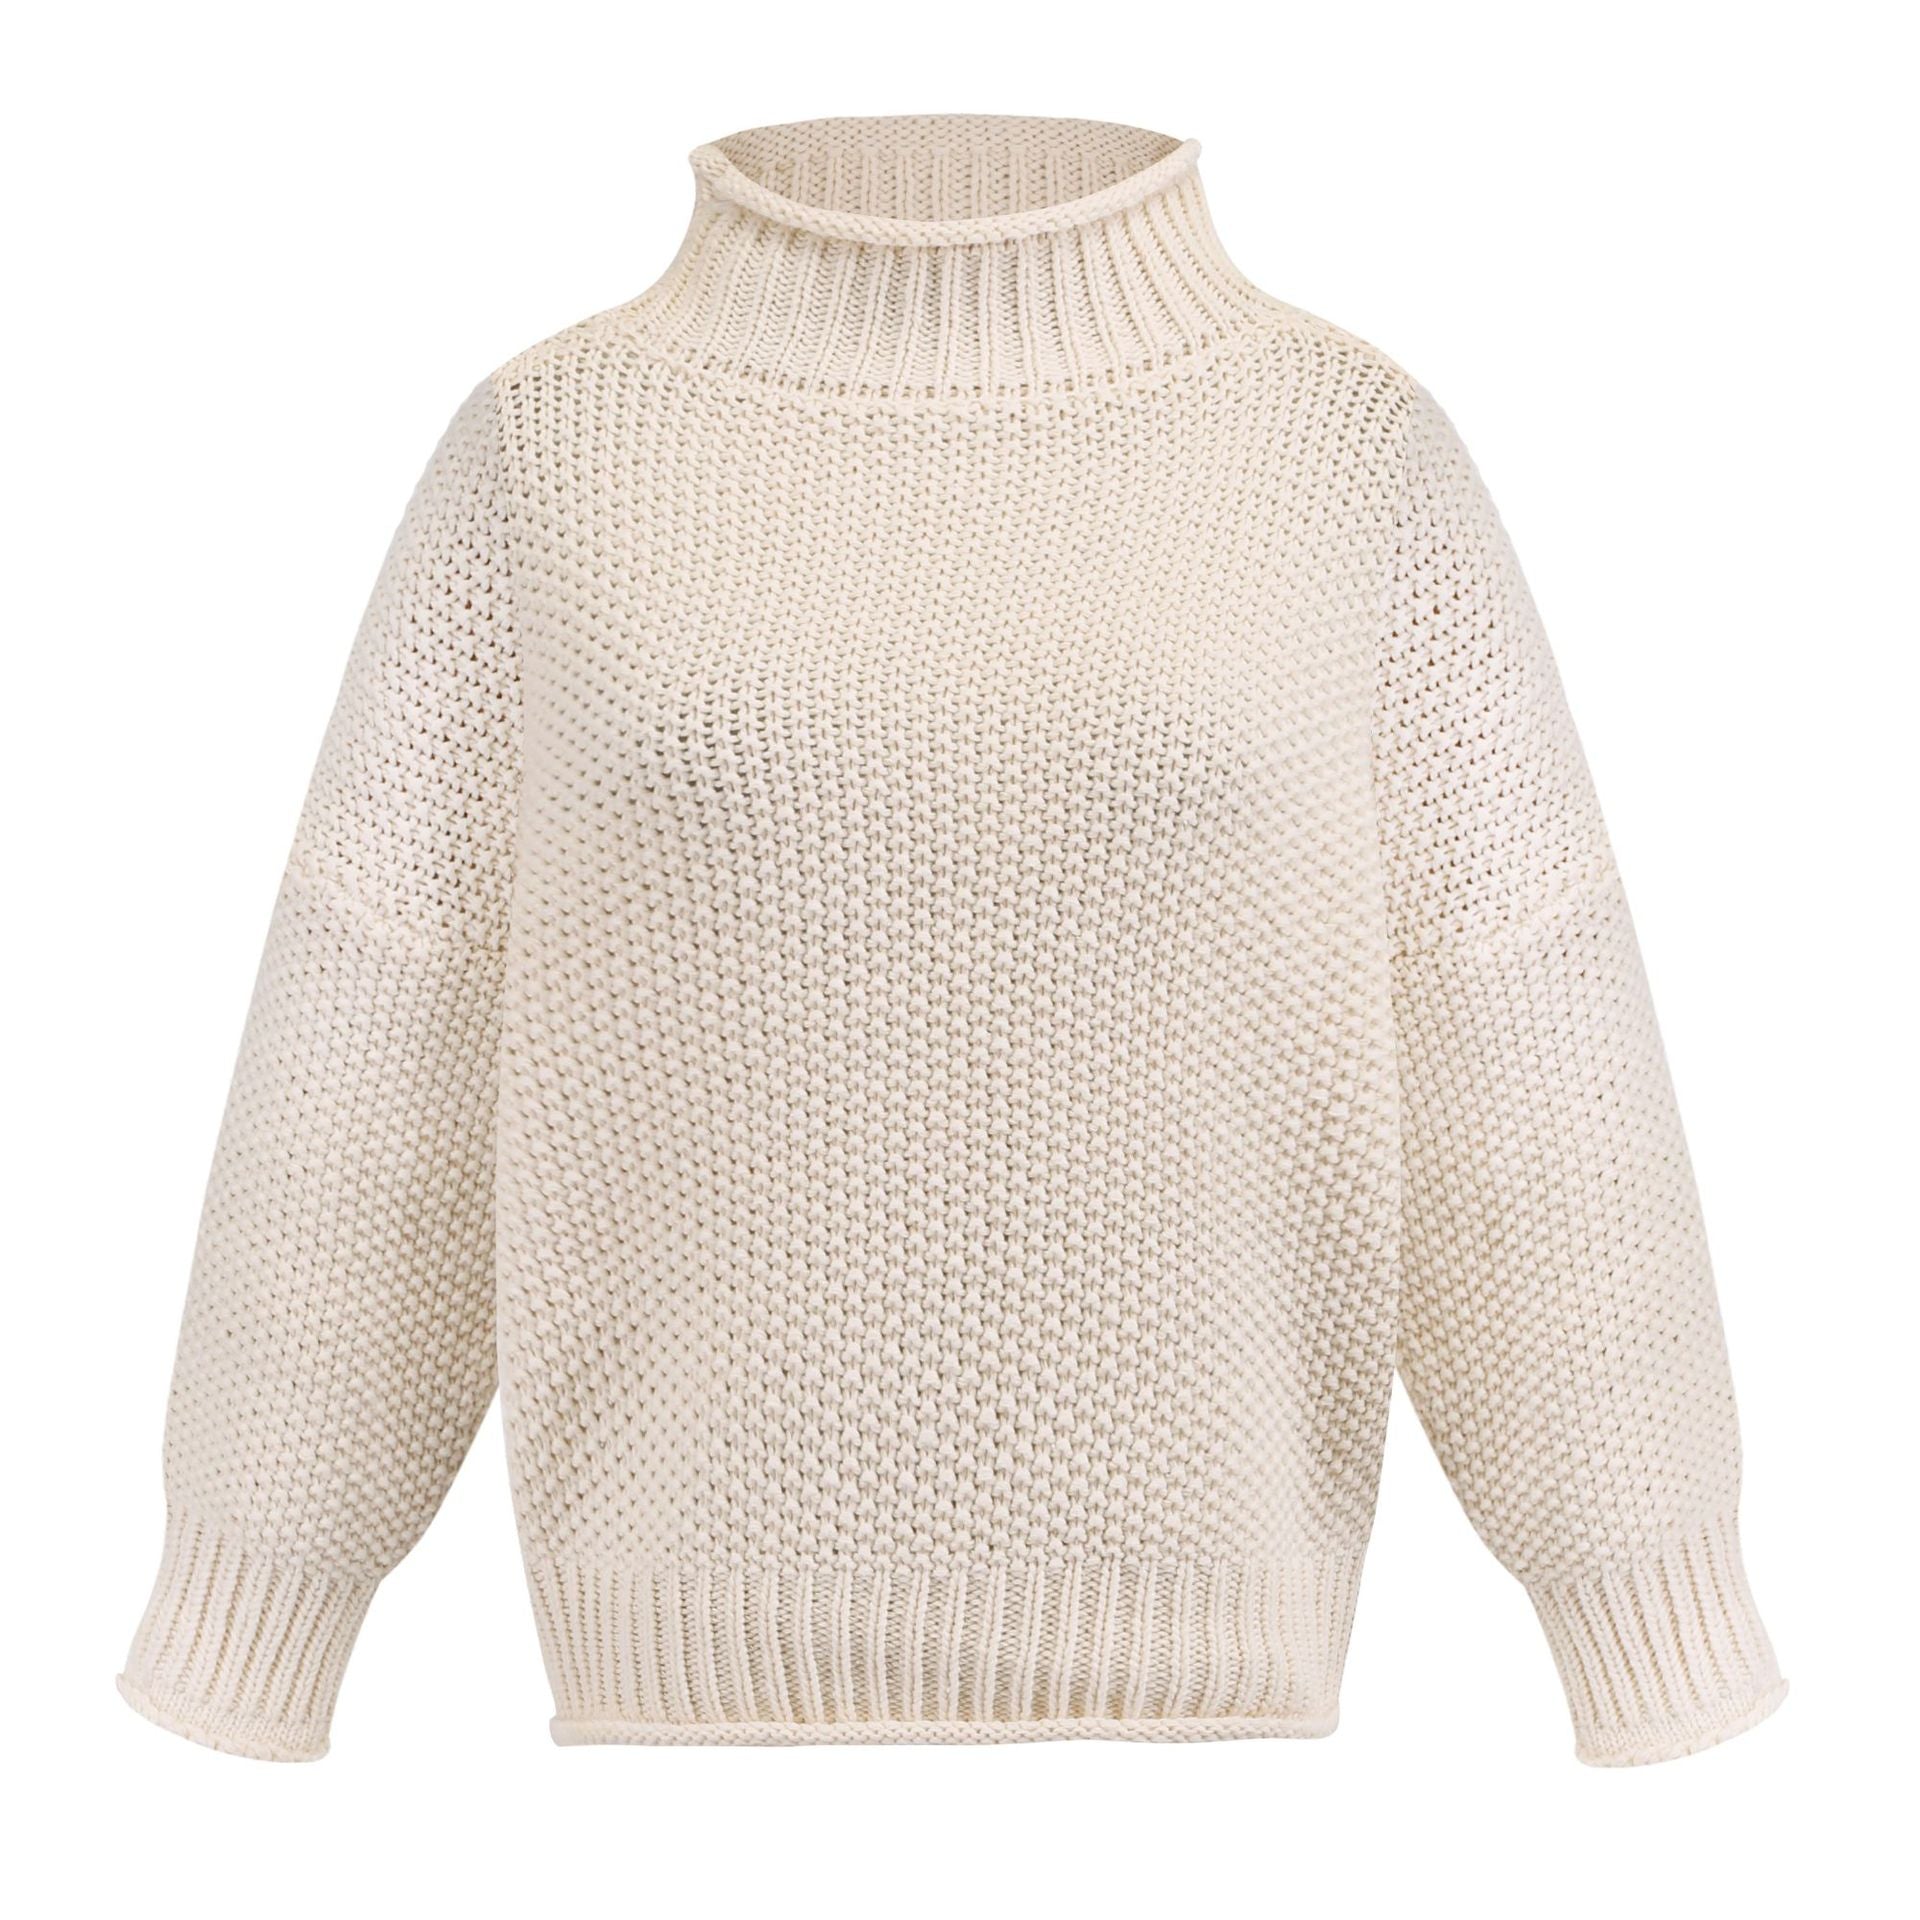 Comfortable Women's Graceful Thick Turtleneck Pullover Sweaters